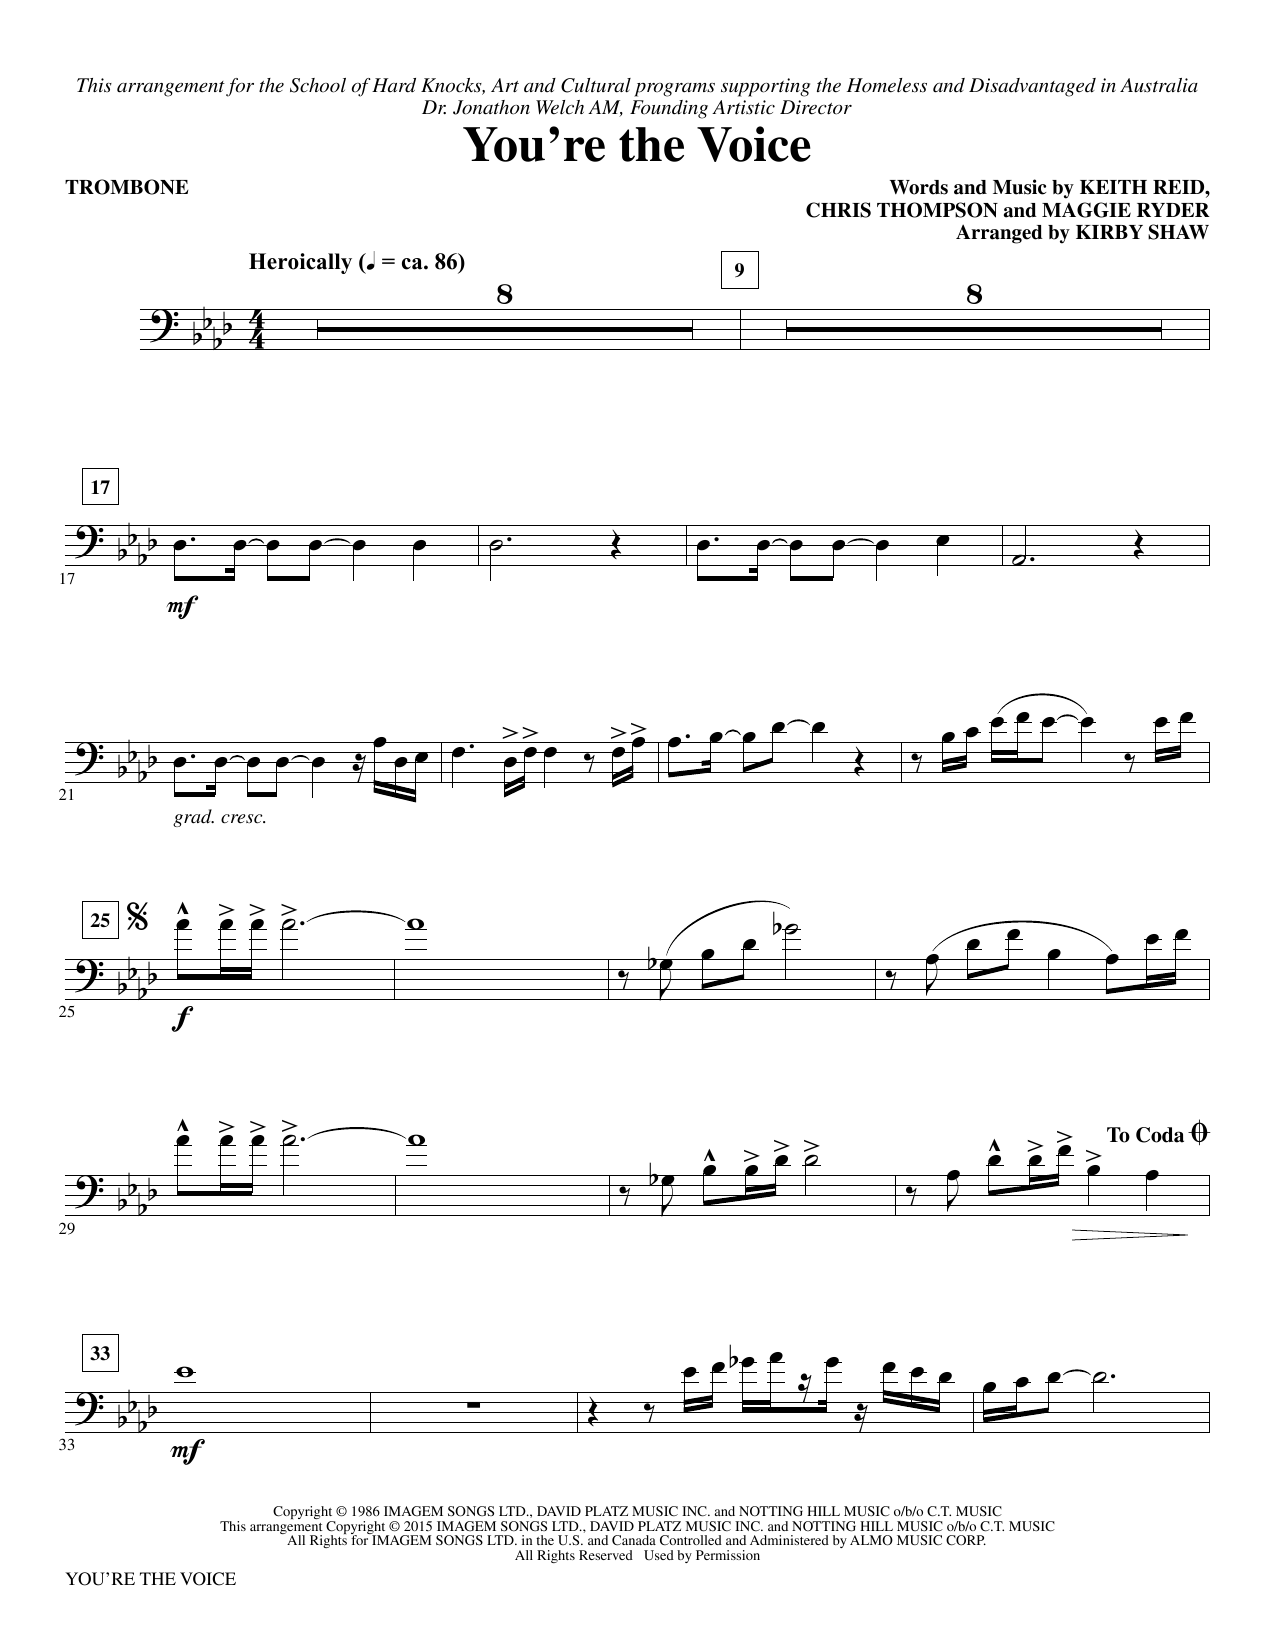 John Farnham You're the Voice (arr. Kirby Shaw) - Trombone sheet music notes and chords. Download Printable PDF.